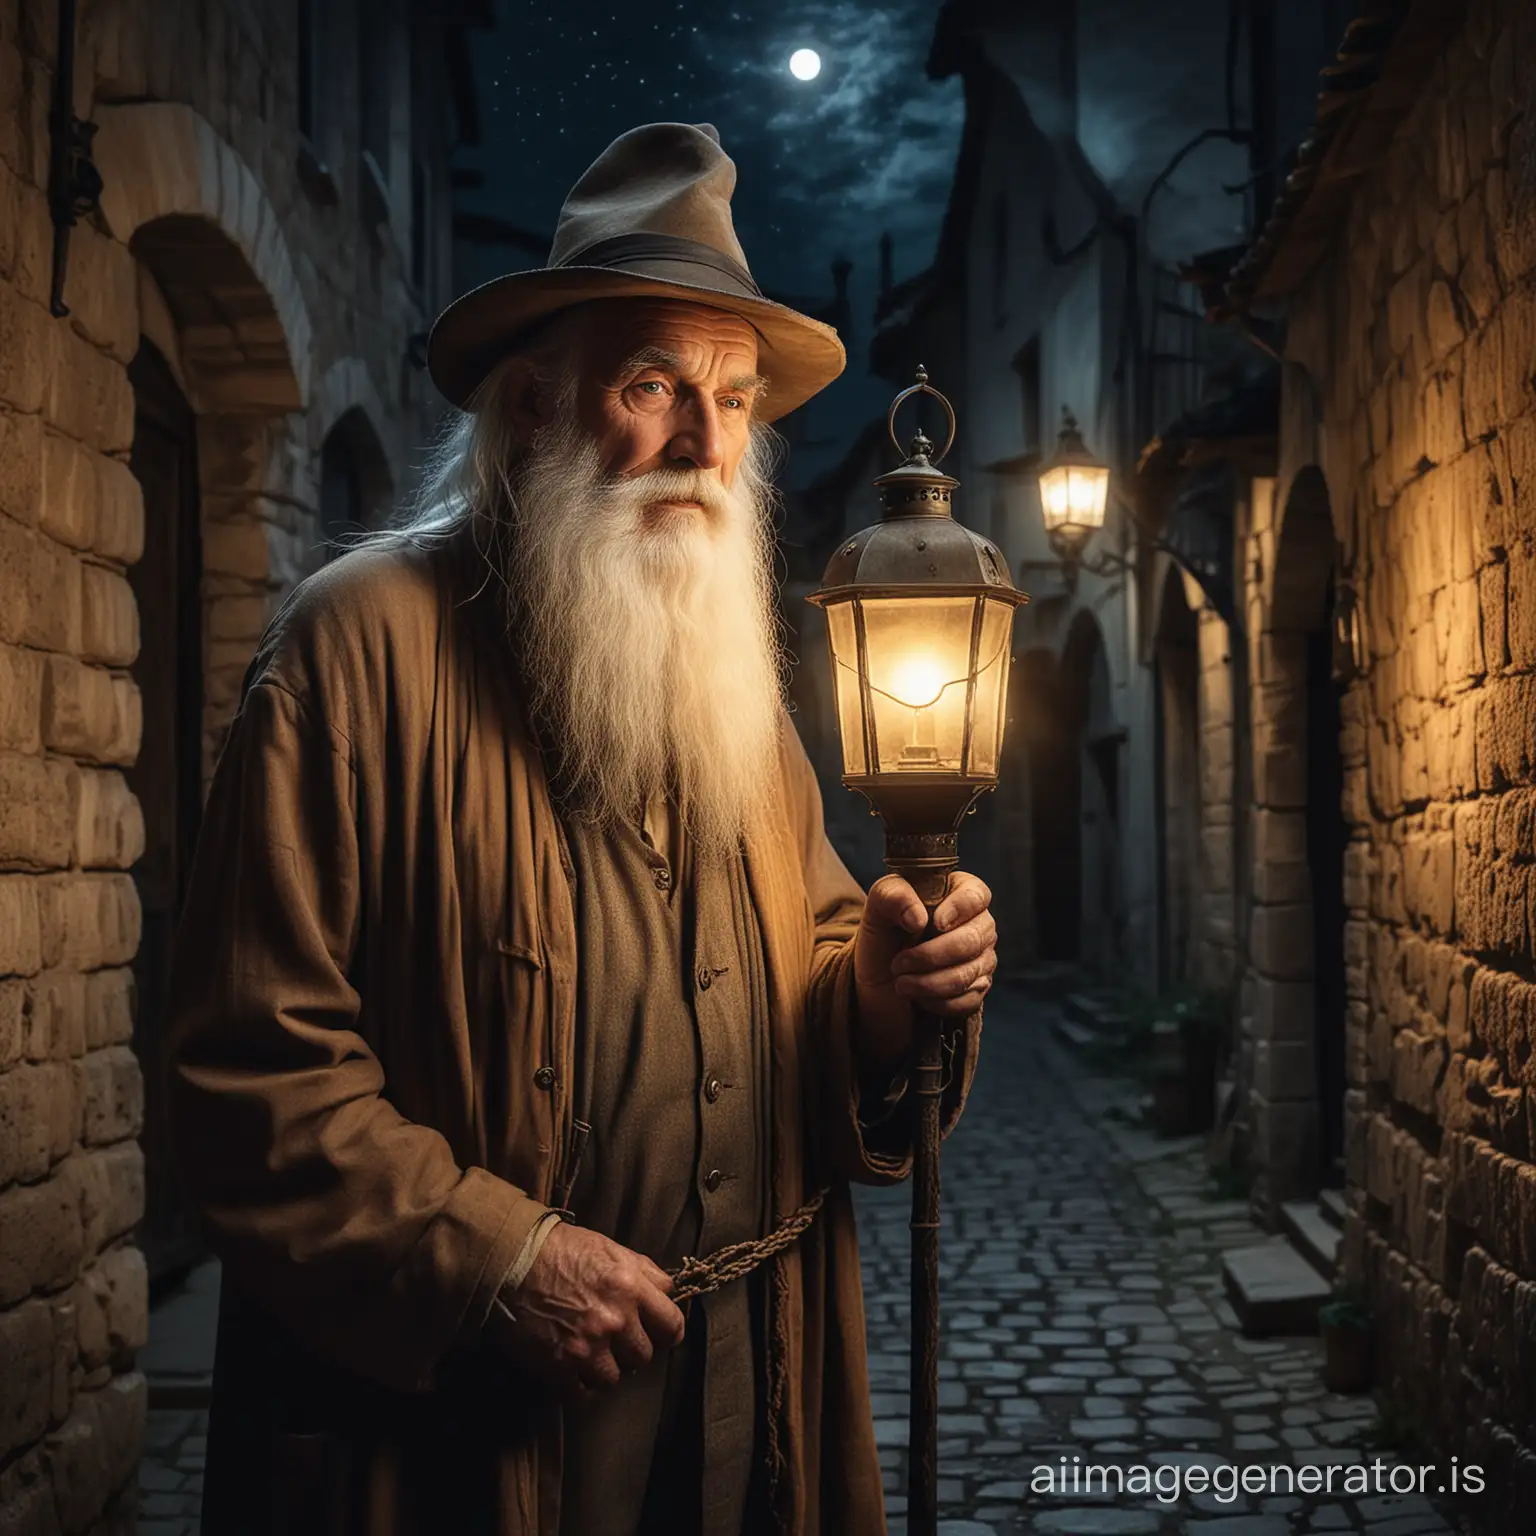 Mysterious-Old-Man-with-Lit-Lamp-in-Medieval-Village-Alley-at-Night